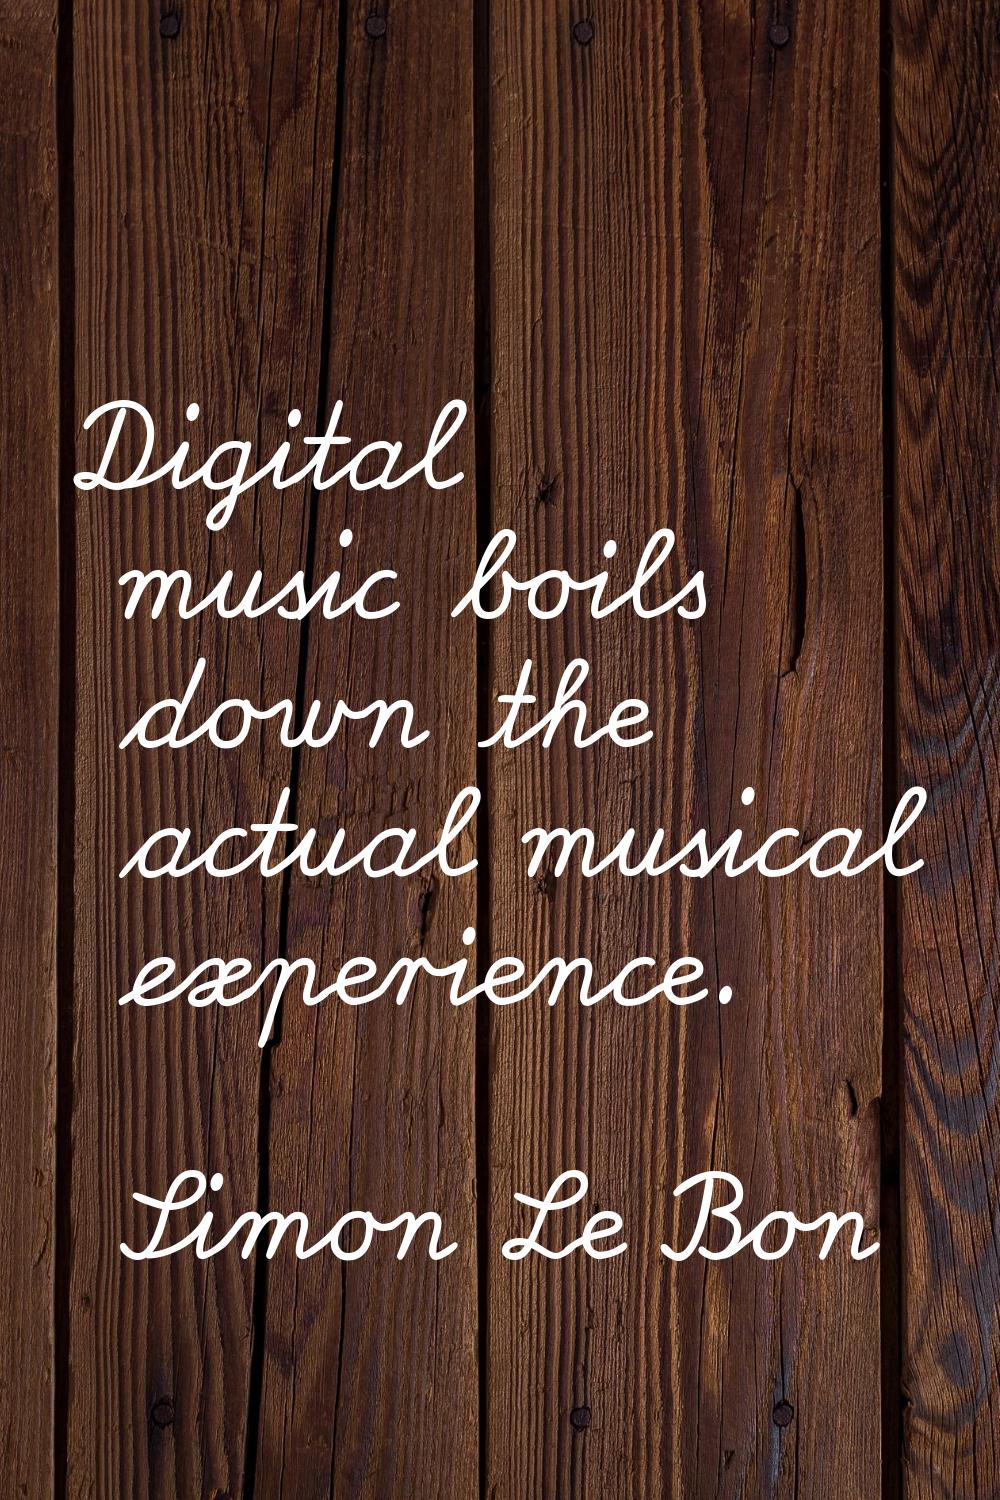 Digital music boils down the actual musical experience.